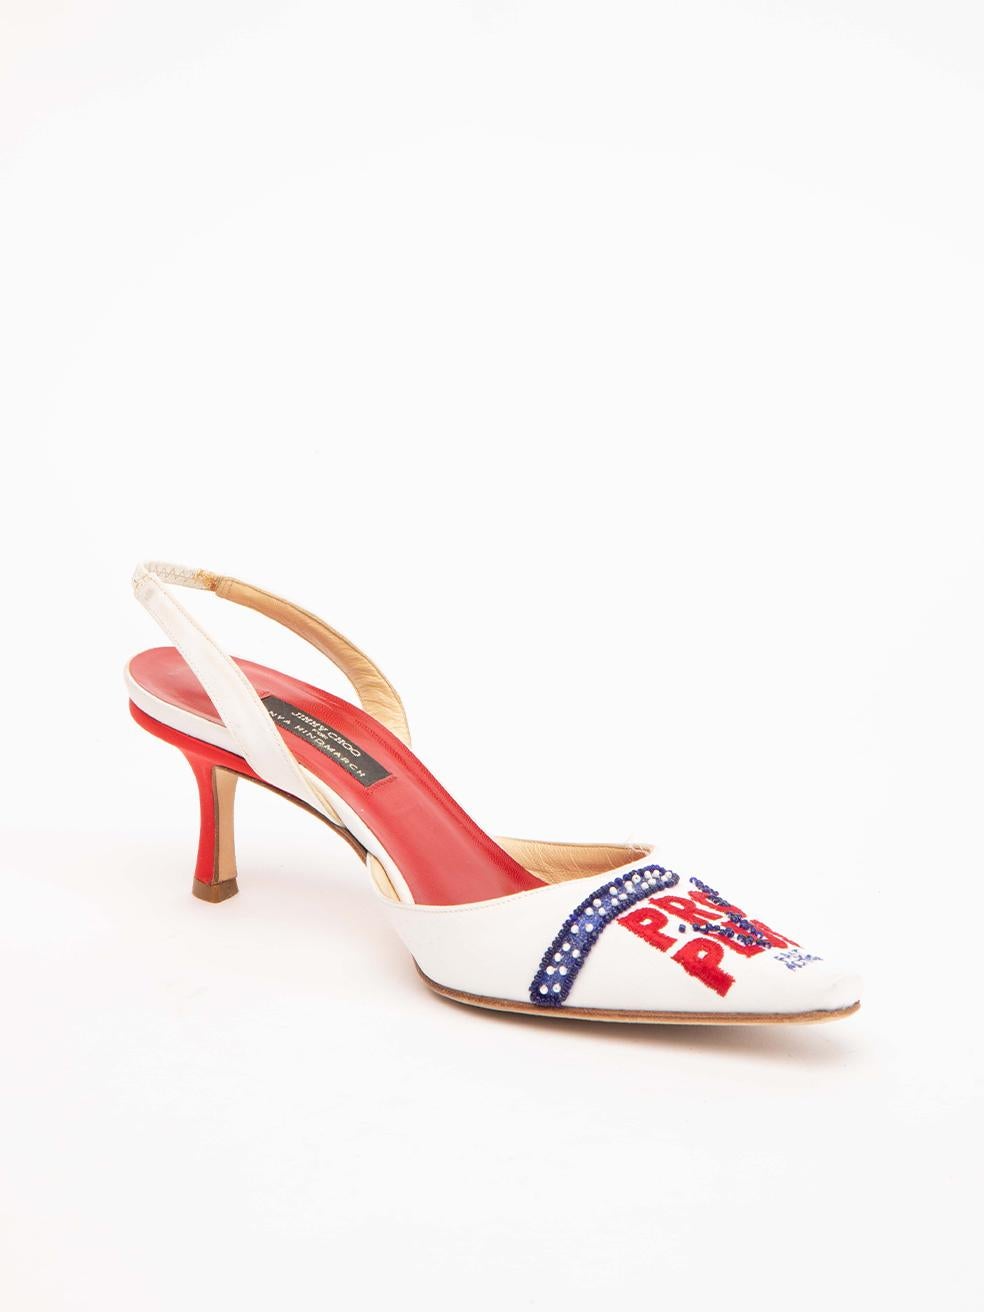 CONDITION is Very good. Minimal wear to heels is evident. Minimal wear to the ankle straps which are stained and there is wear to the heel stem. There is also some loose thread around the topline on this used Jimmy Choo for Anya Hindmarch  designer